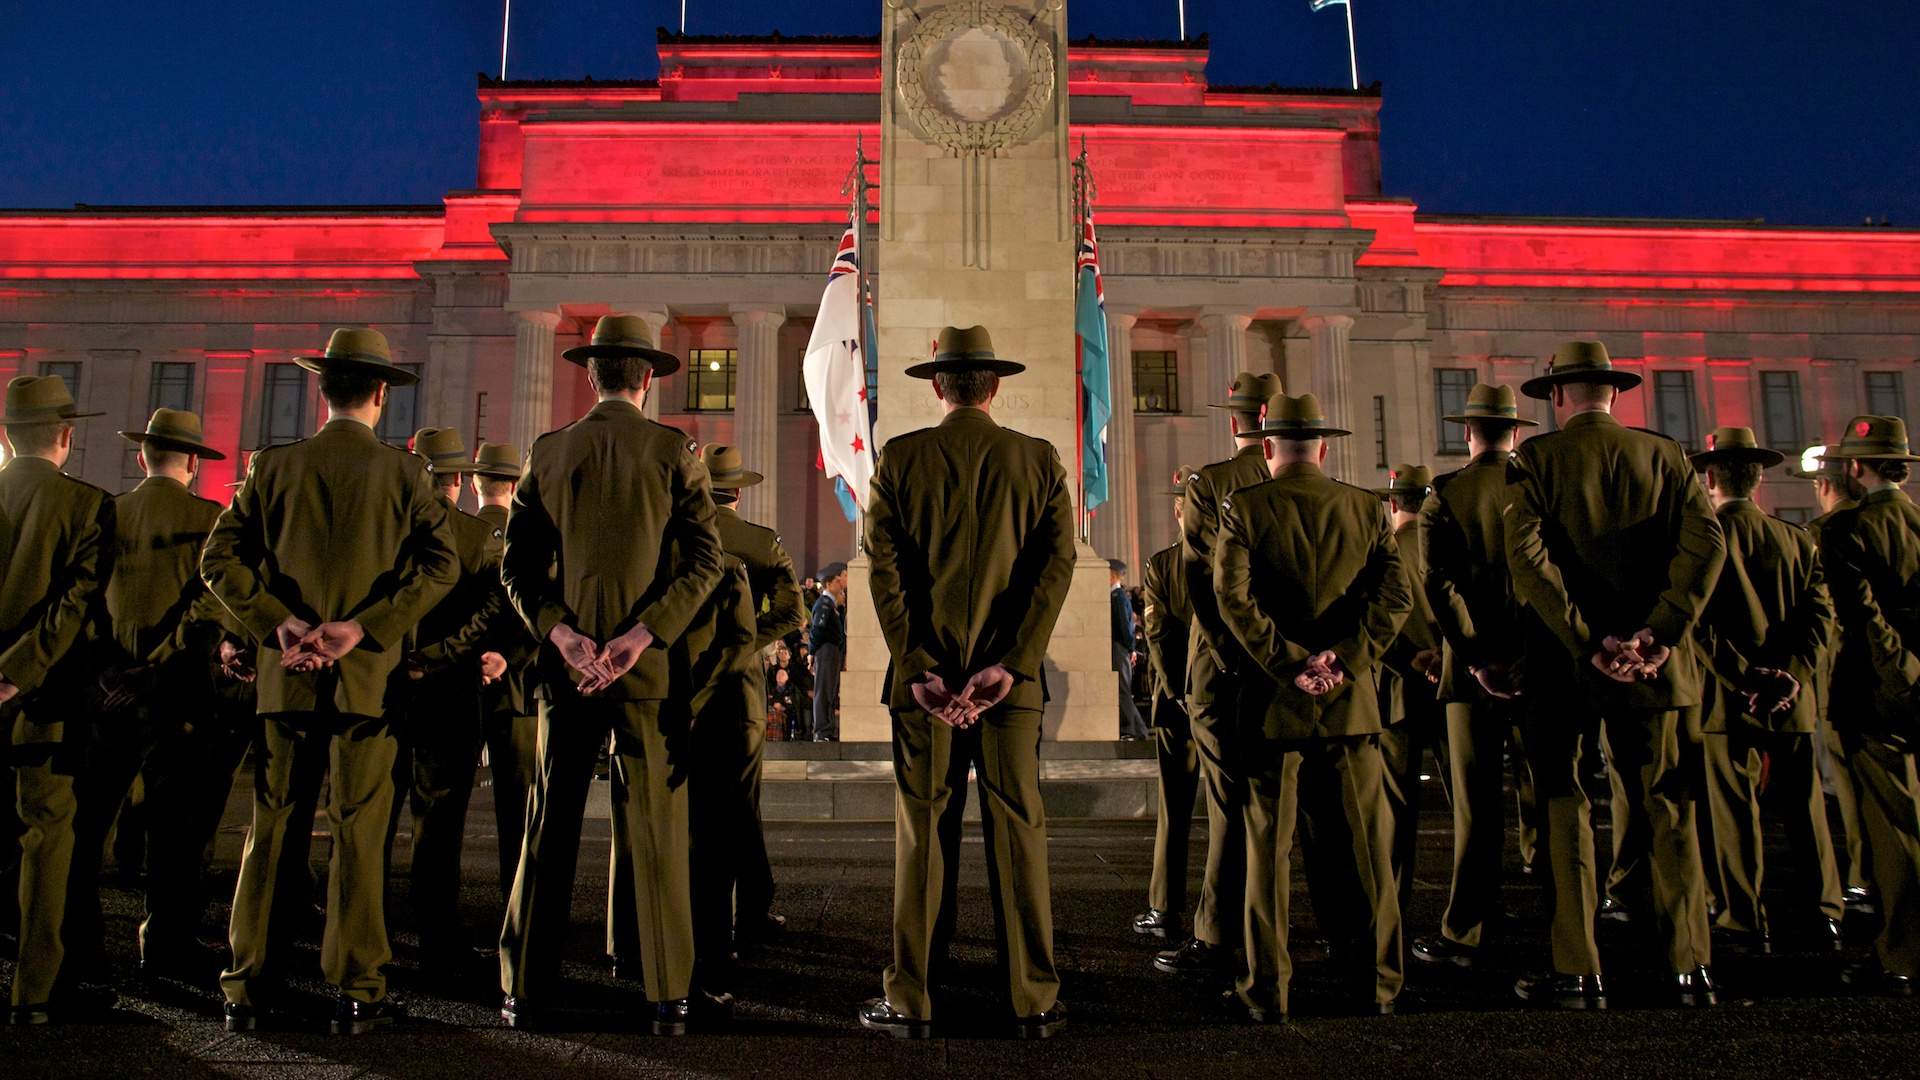 New Zealand ANZAC Day Commemorations Have Been Cancelled Due to COVID-19